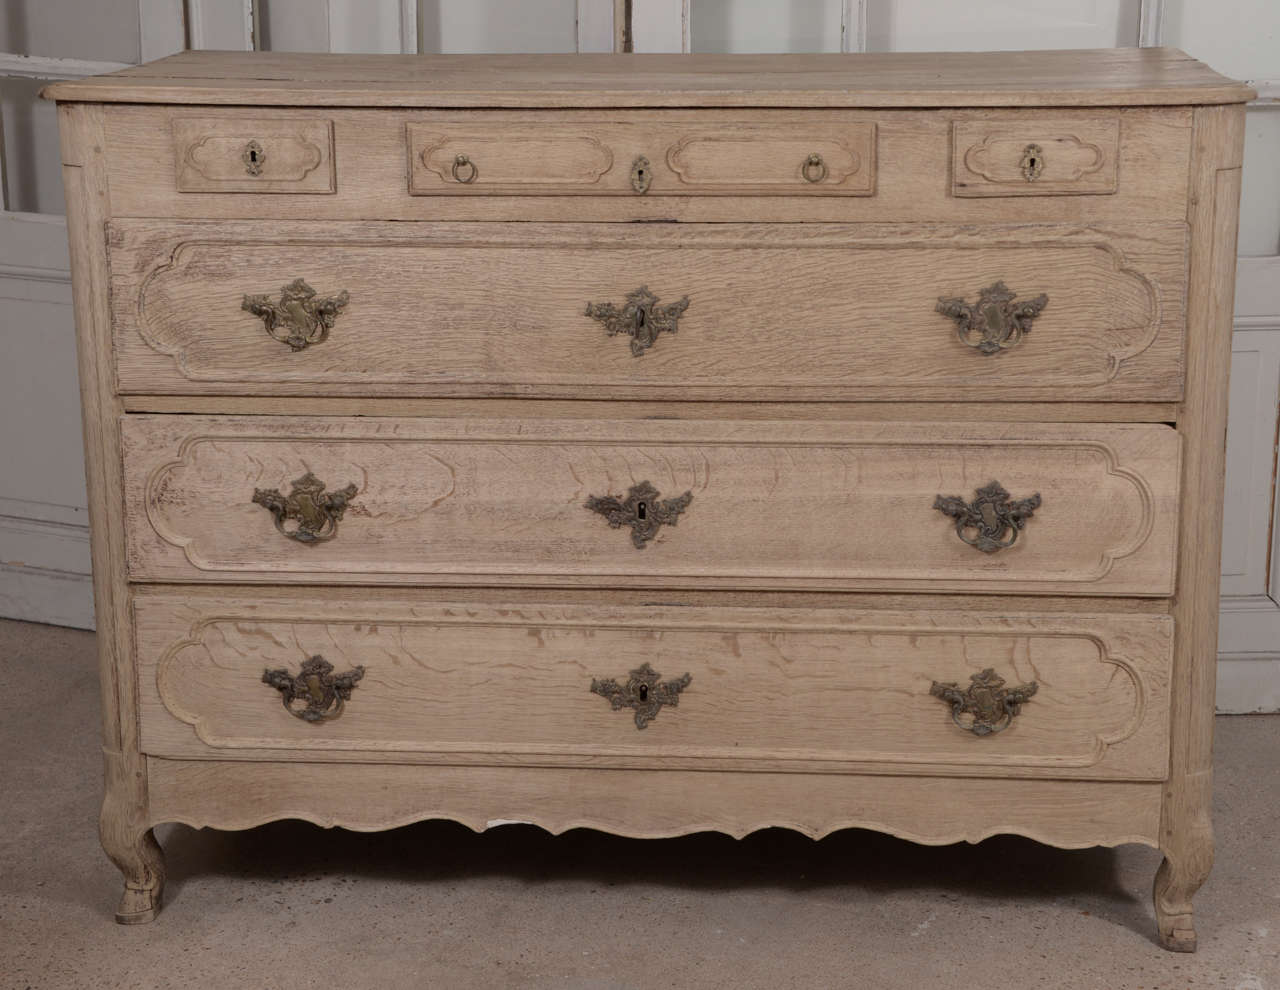 Early 19th century 5 drawer scrubbed oak Commode.